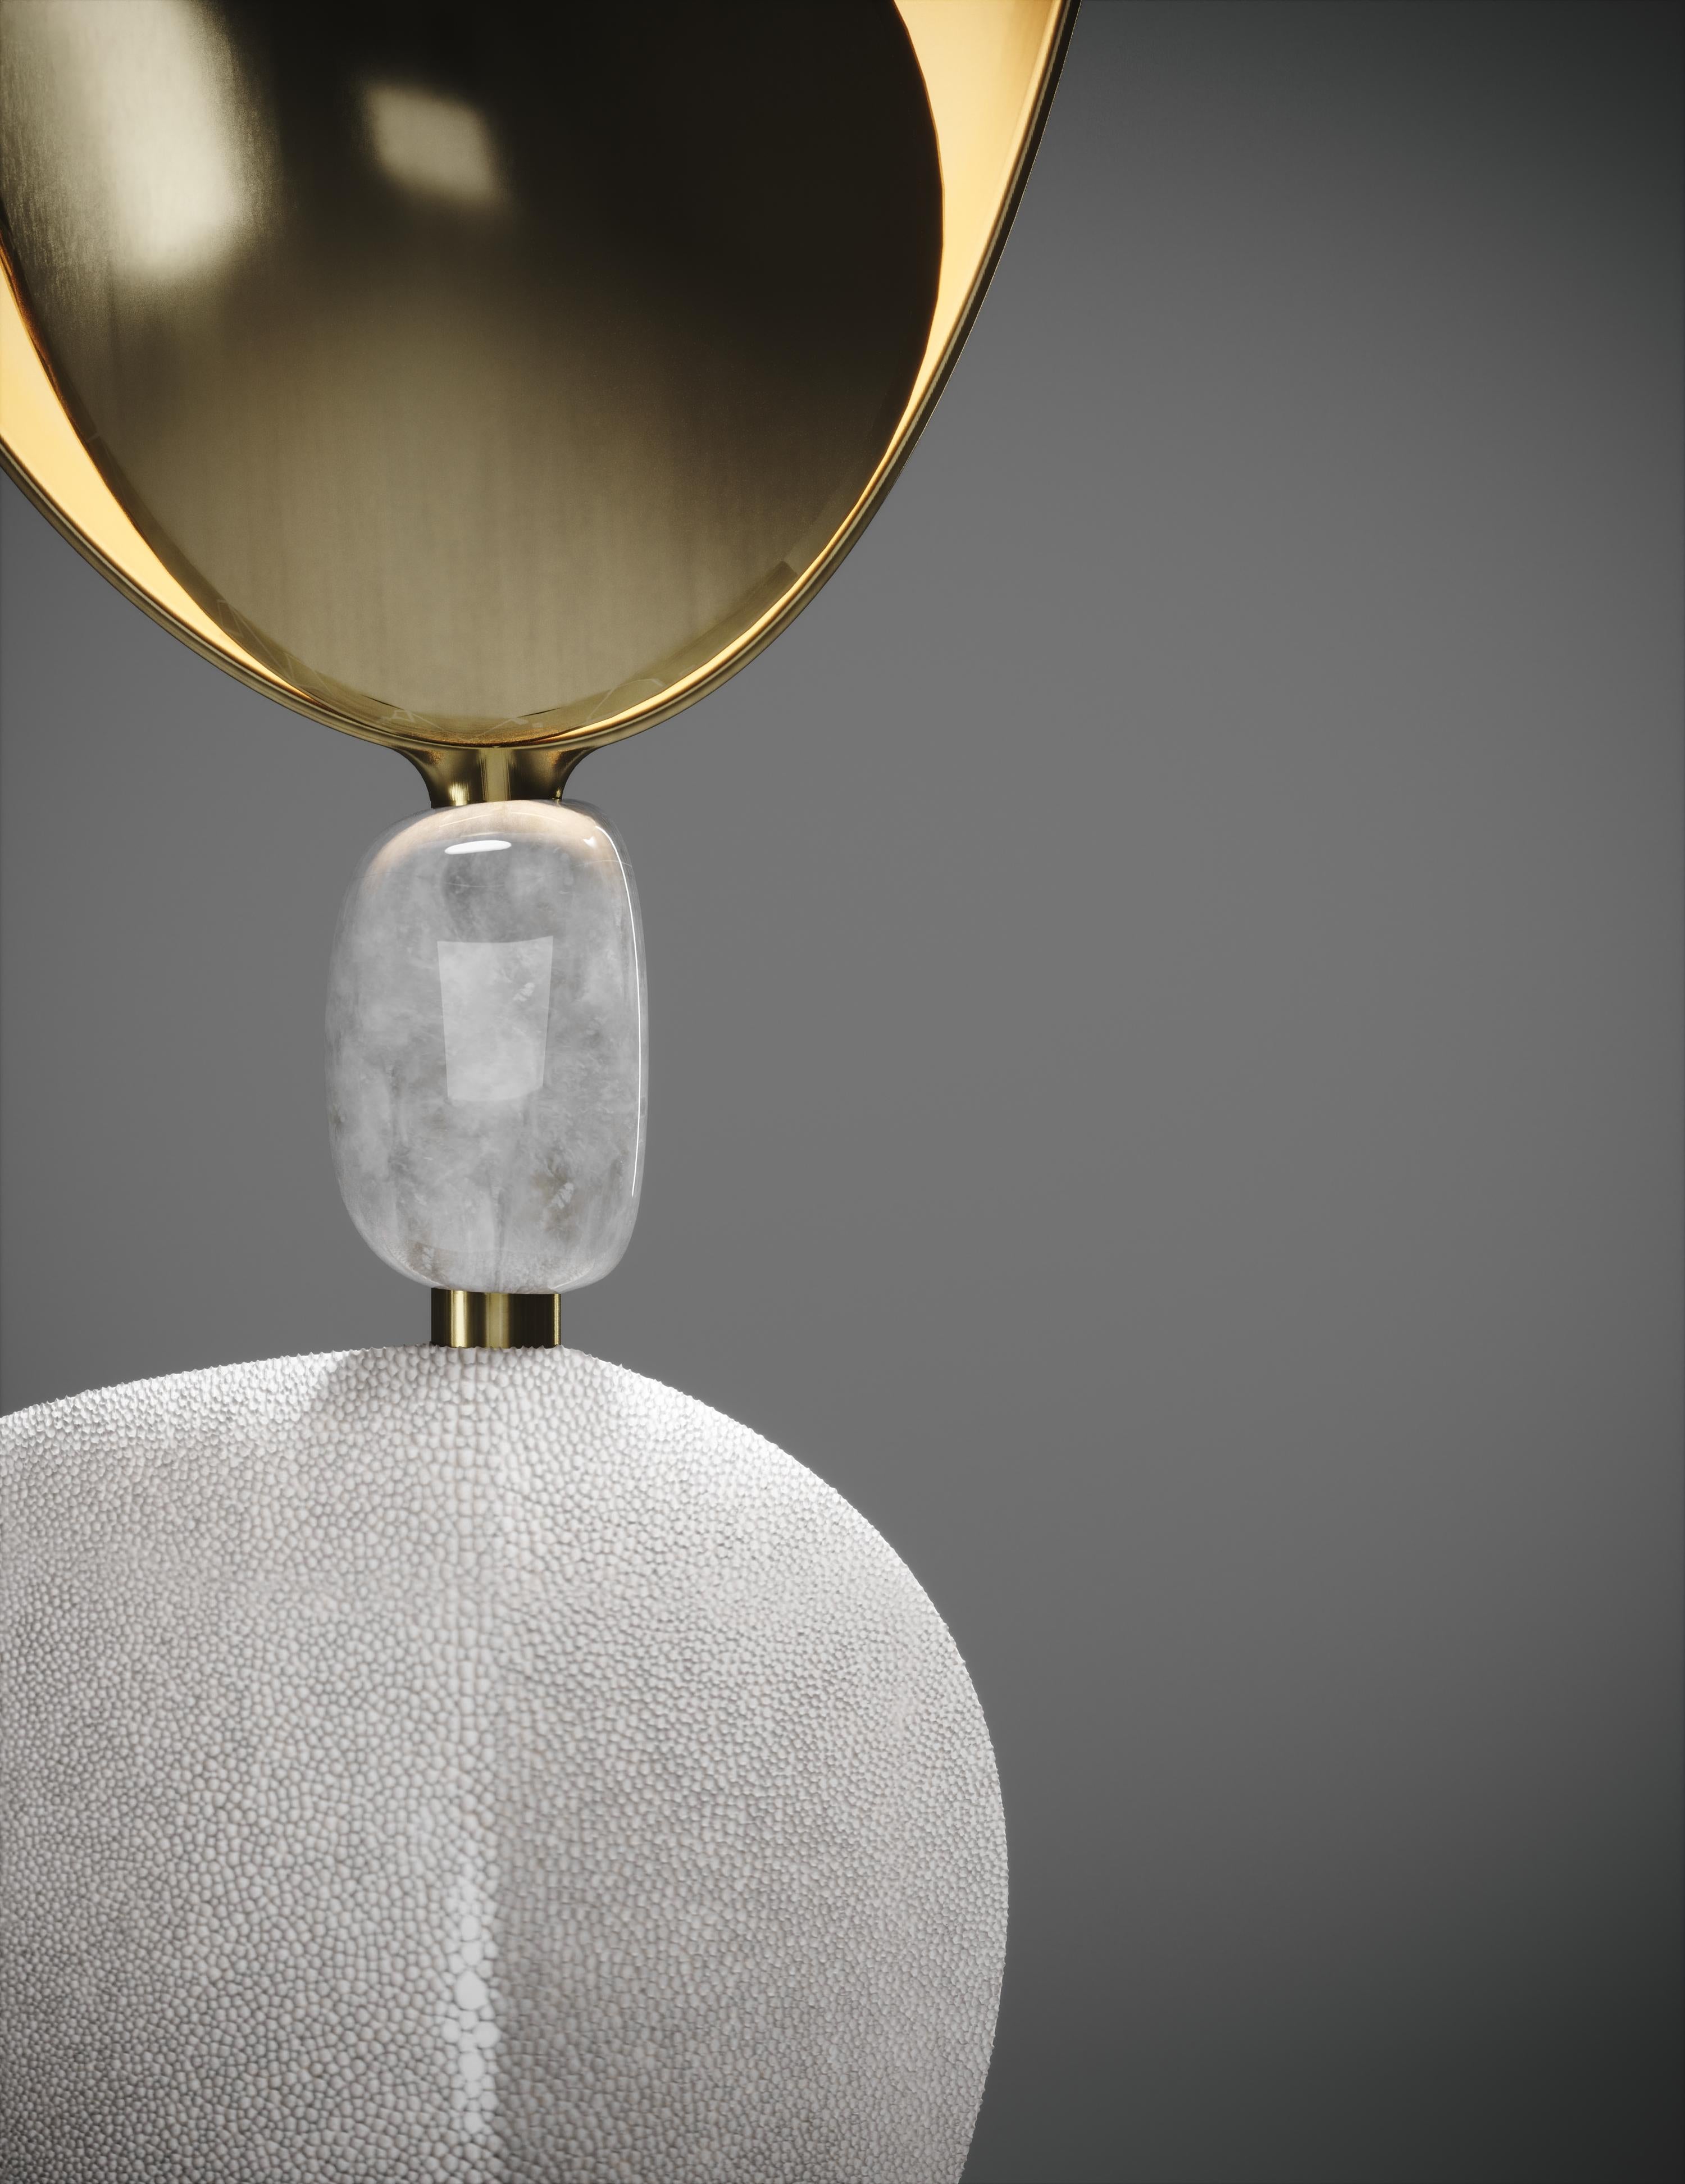 The Cosmo Bird table lamp by Kifu Paris is a whimsical and sculptural piece, inlaid in cream shagreen and bronze-patina brass with a beautiful quartz piece in the center. The amorphous shapes are an abstract and poetic reinterpretation of a bird